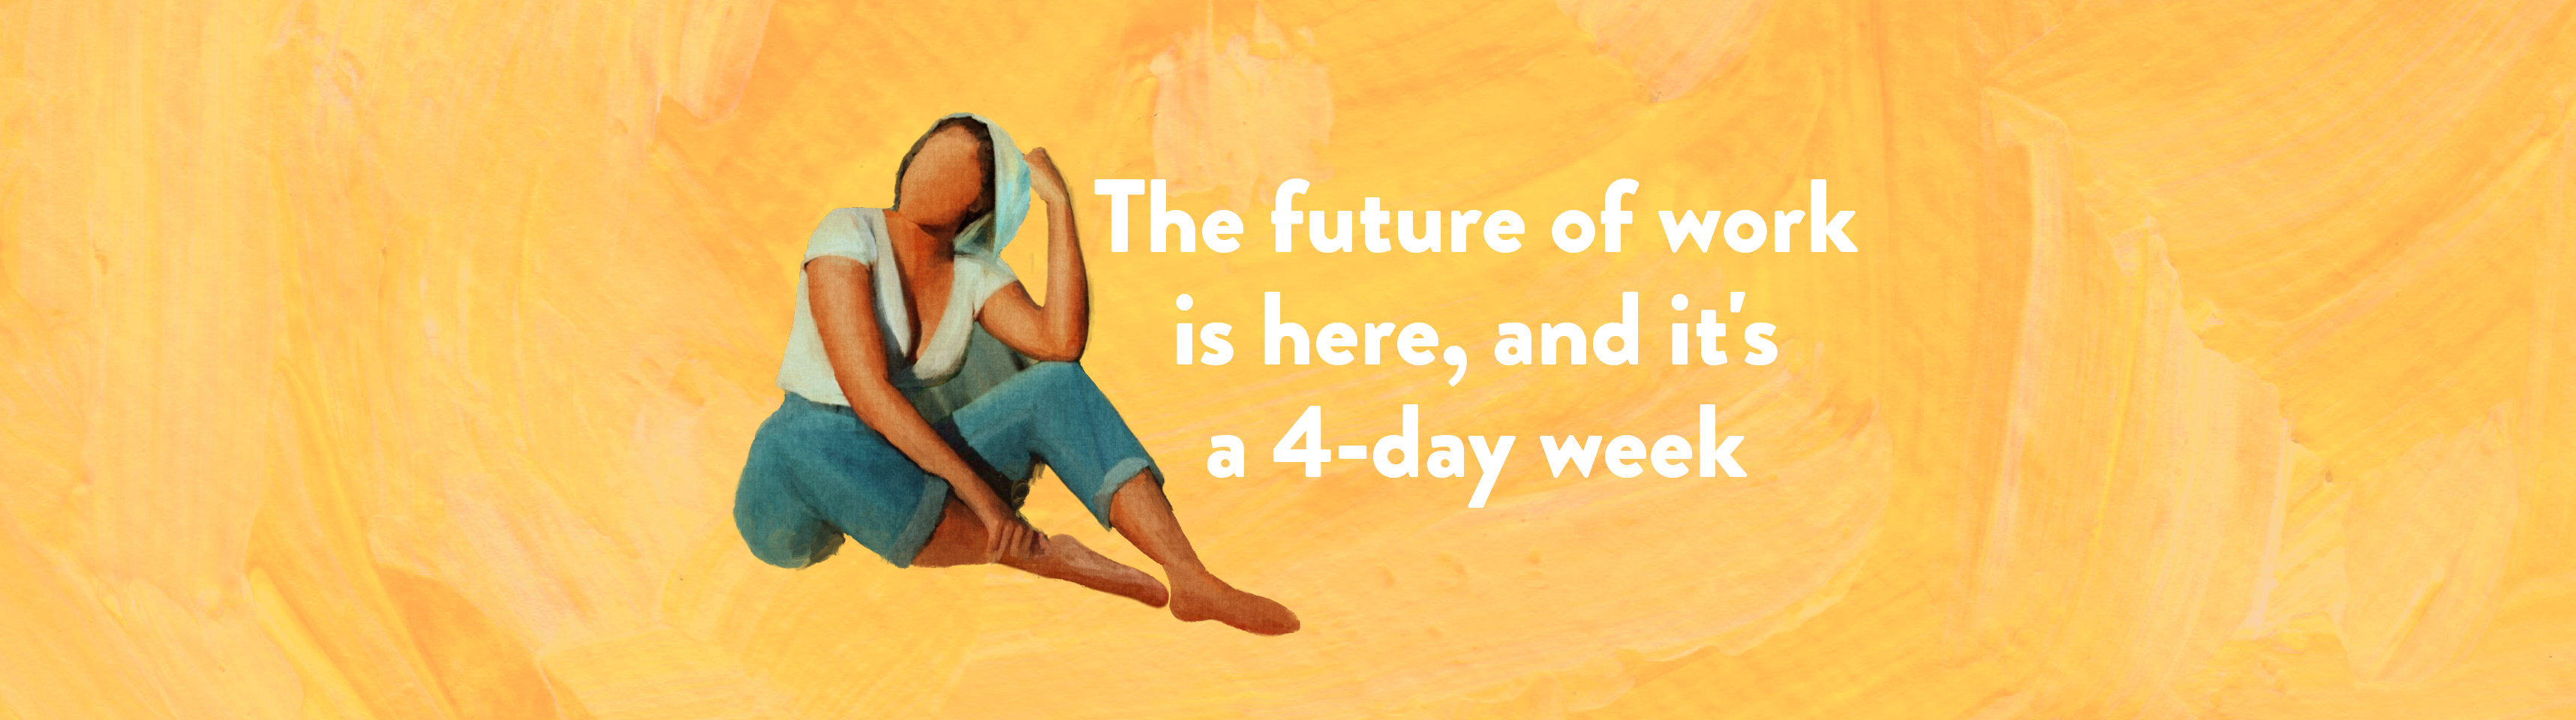 The future of work is here, and it’s a 4-day week 